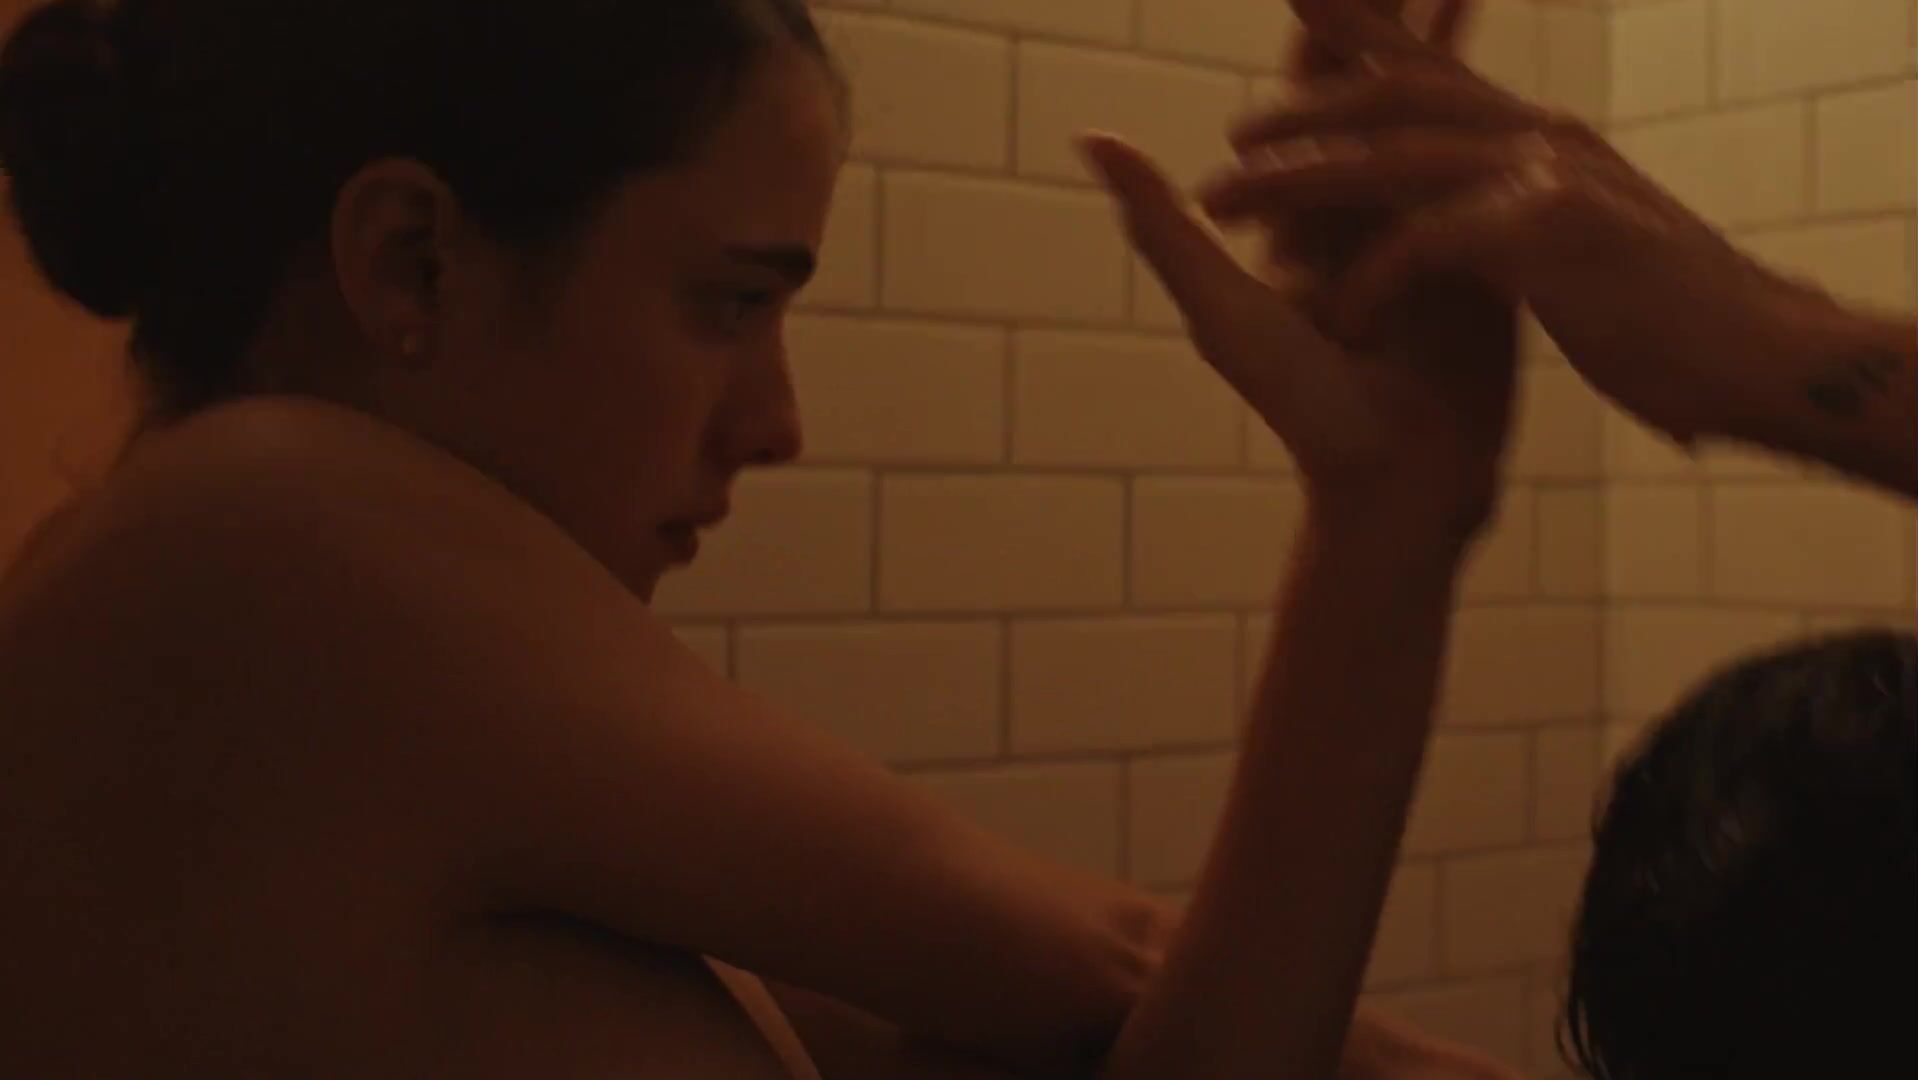 Gay Shop Man fucks petite actress Margaret Qualley in music video Love Me Like You Hate Me Lesbians - 2